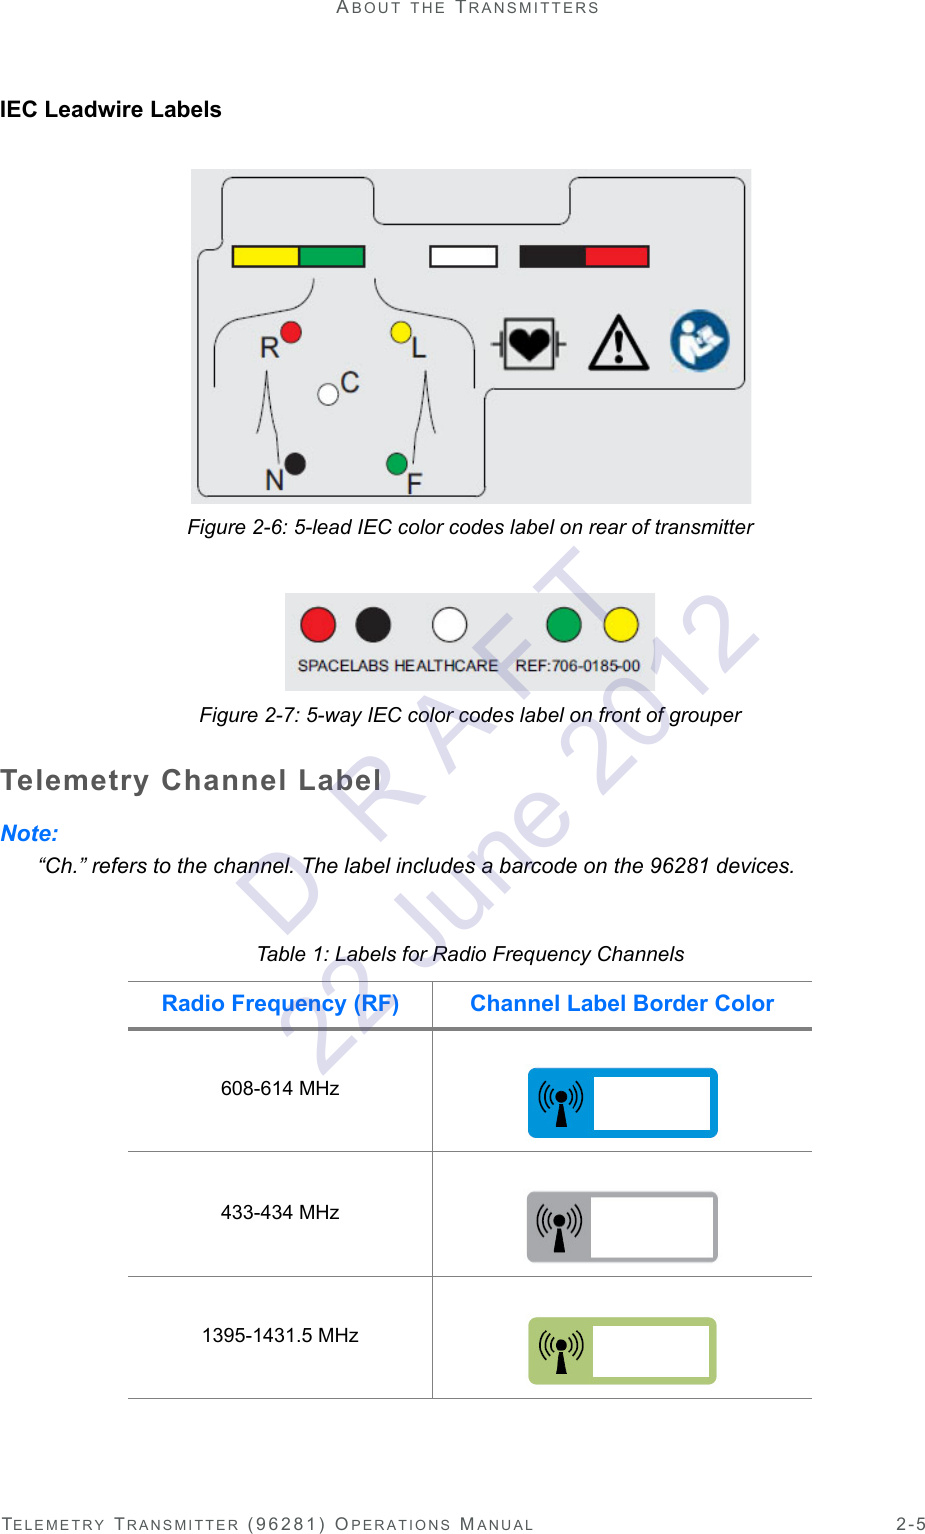 TELEMETRY TRANSMITTER (96281) OPERATIONS MANUAL 2-5ABOUT THE TRANSMITTERSIEC Leadwire LabelsFigure 2-6: 5-lead IEC color codes label on rear of transmitter Figure 2-7: 5-way IEC color codes label on front of grouper Telemetry Channel LabelNote:“Ch.” refers to the channel. The label includes a barcode on the 96281 devices.Table 1: Labels for Radio Frequency ChannelsRadio Frequency (RF) Channel Label Border Color608-614 MHz433-434 MHz1395-1431.5 MHzD  R A F T 22 June 2012